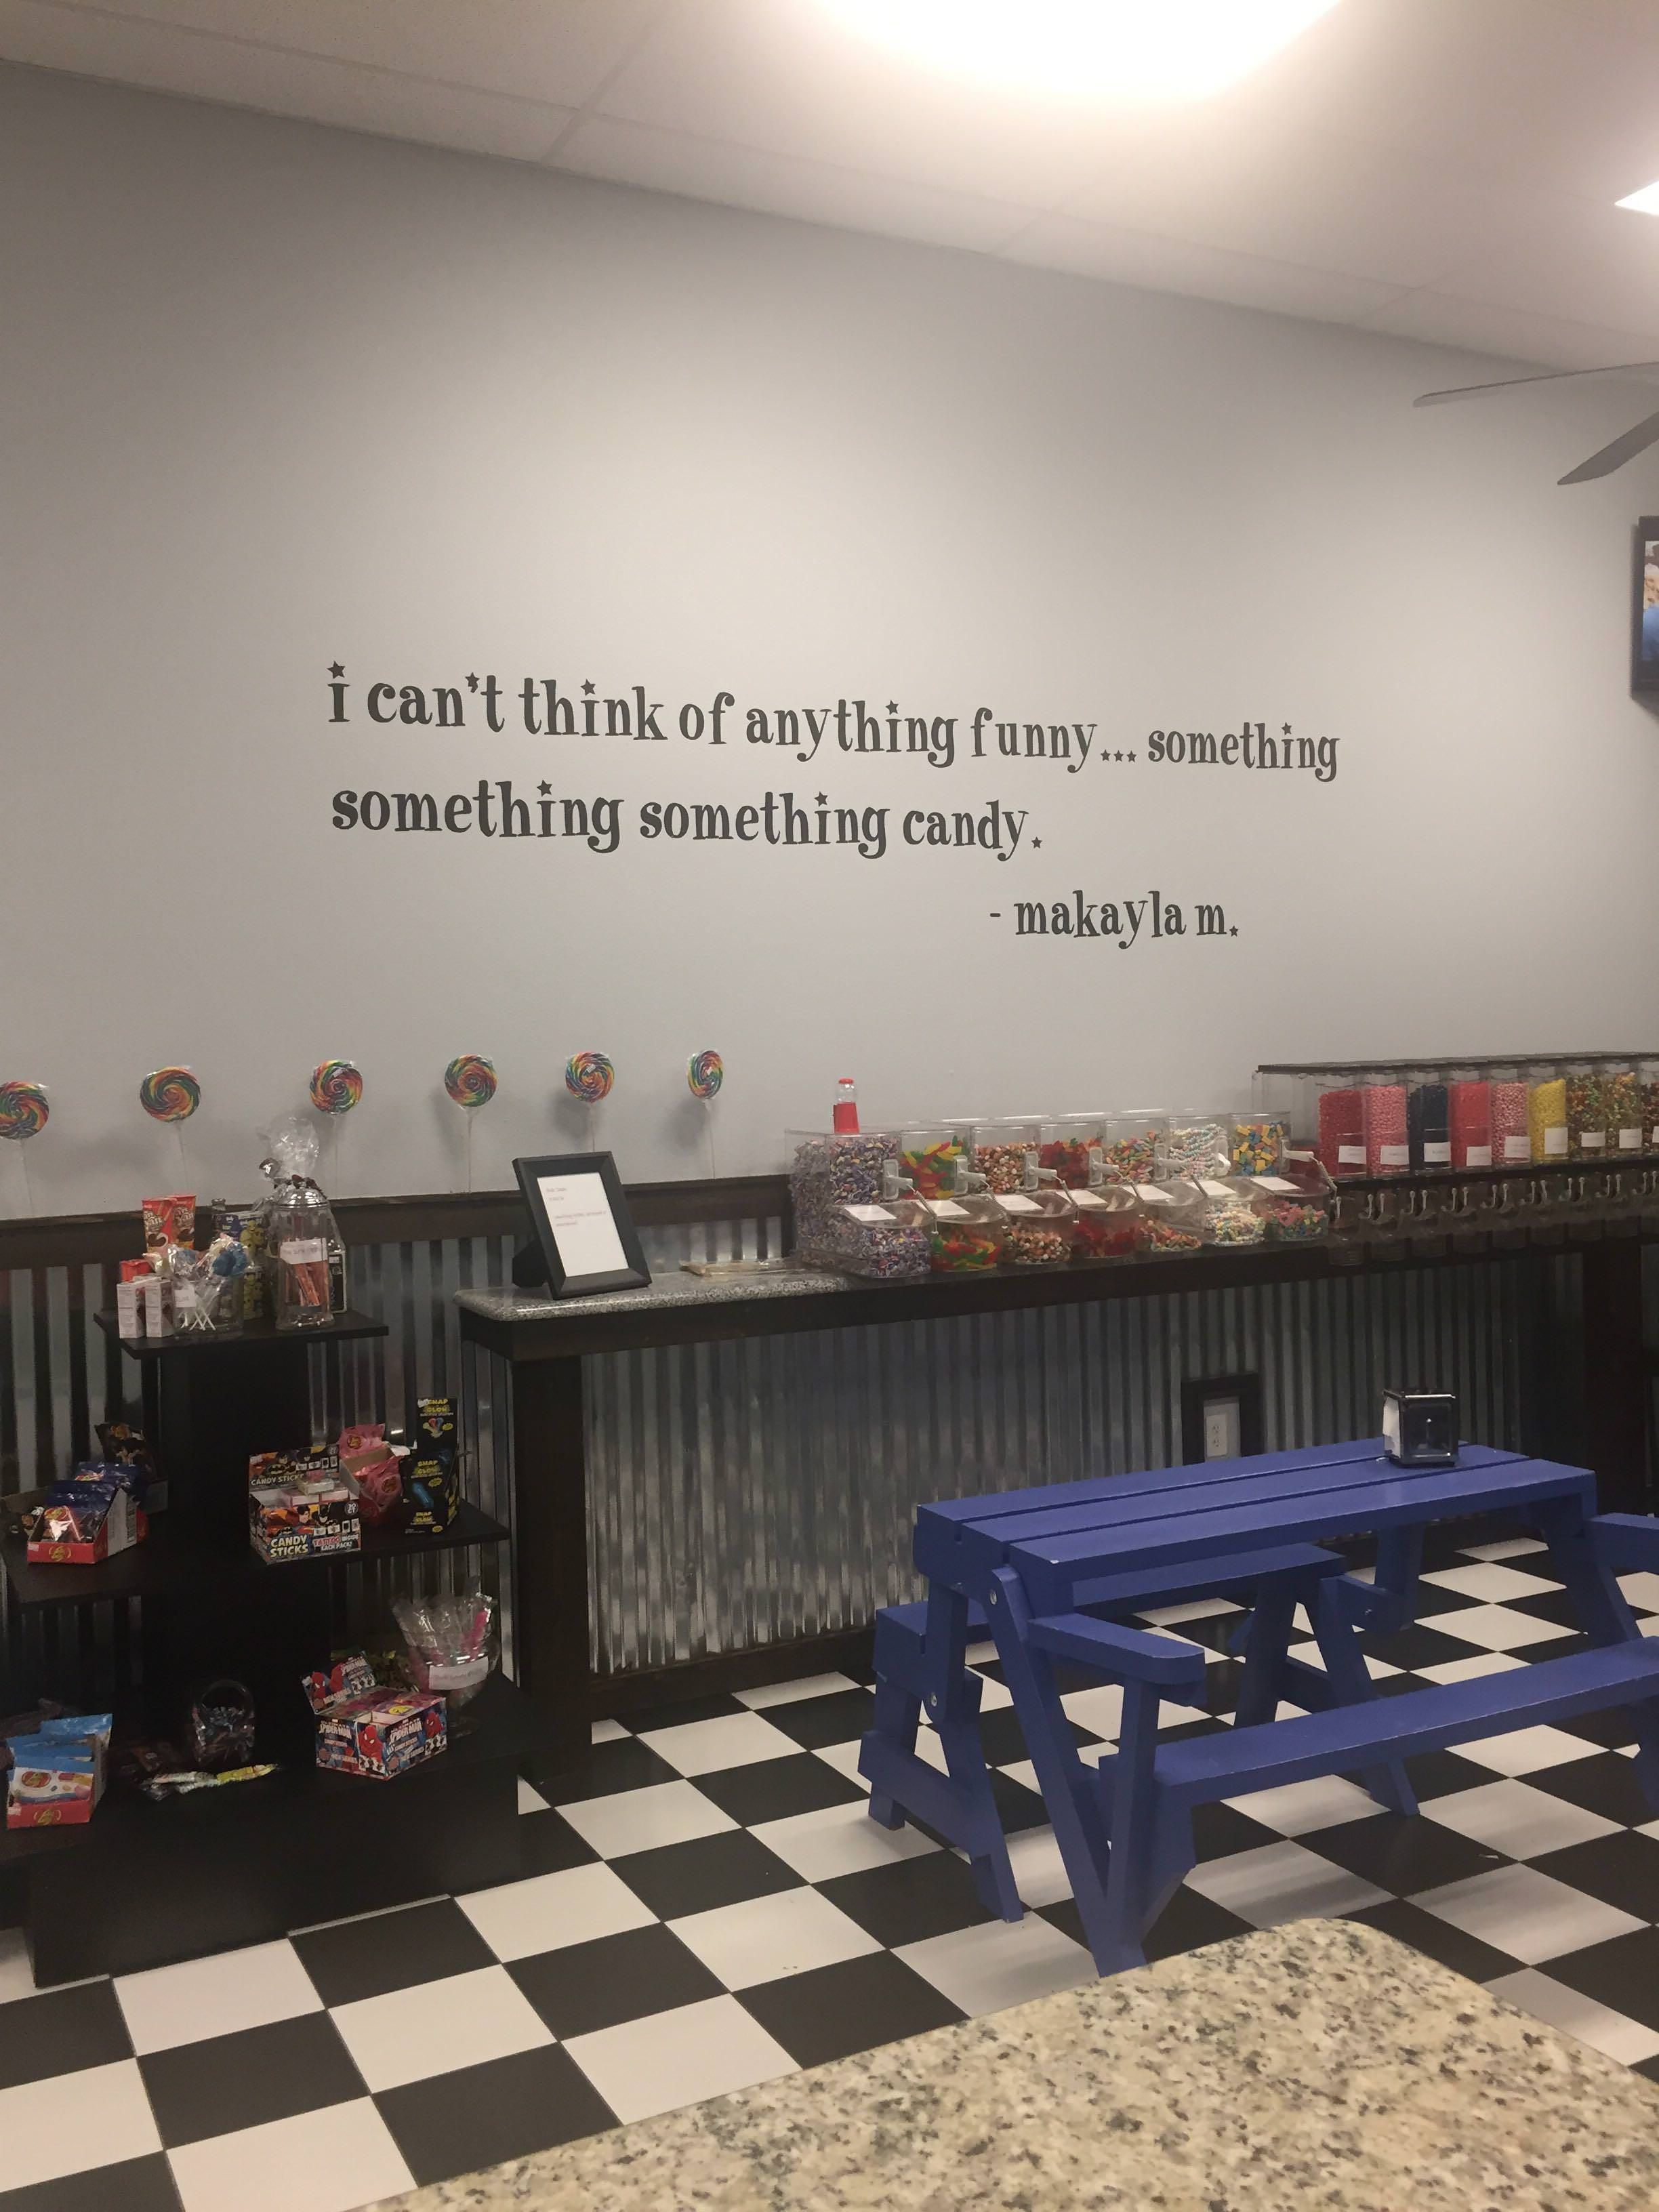 We opened a candy store and I asked my 7yr old daughter for a fun quote about candy